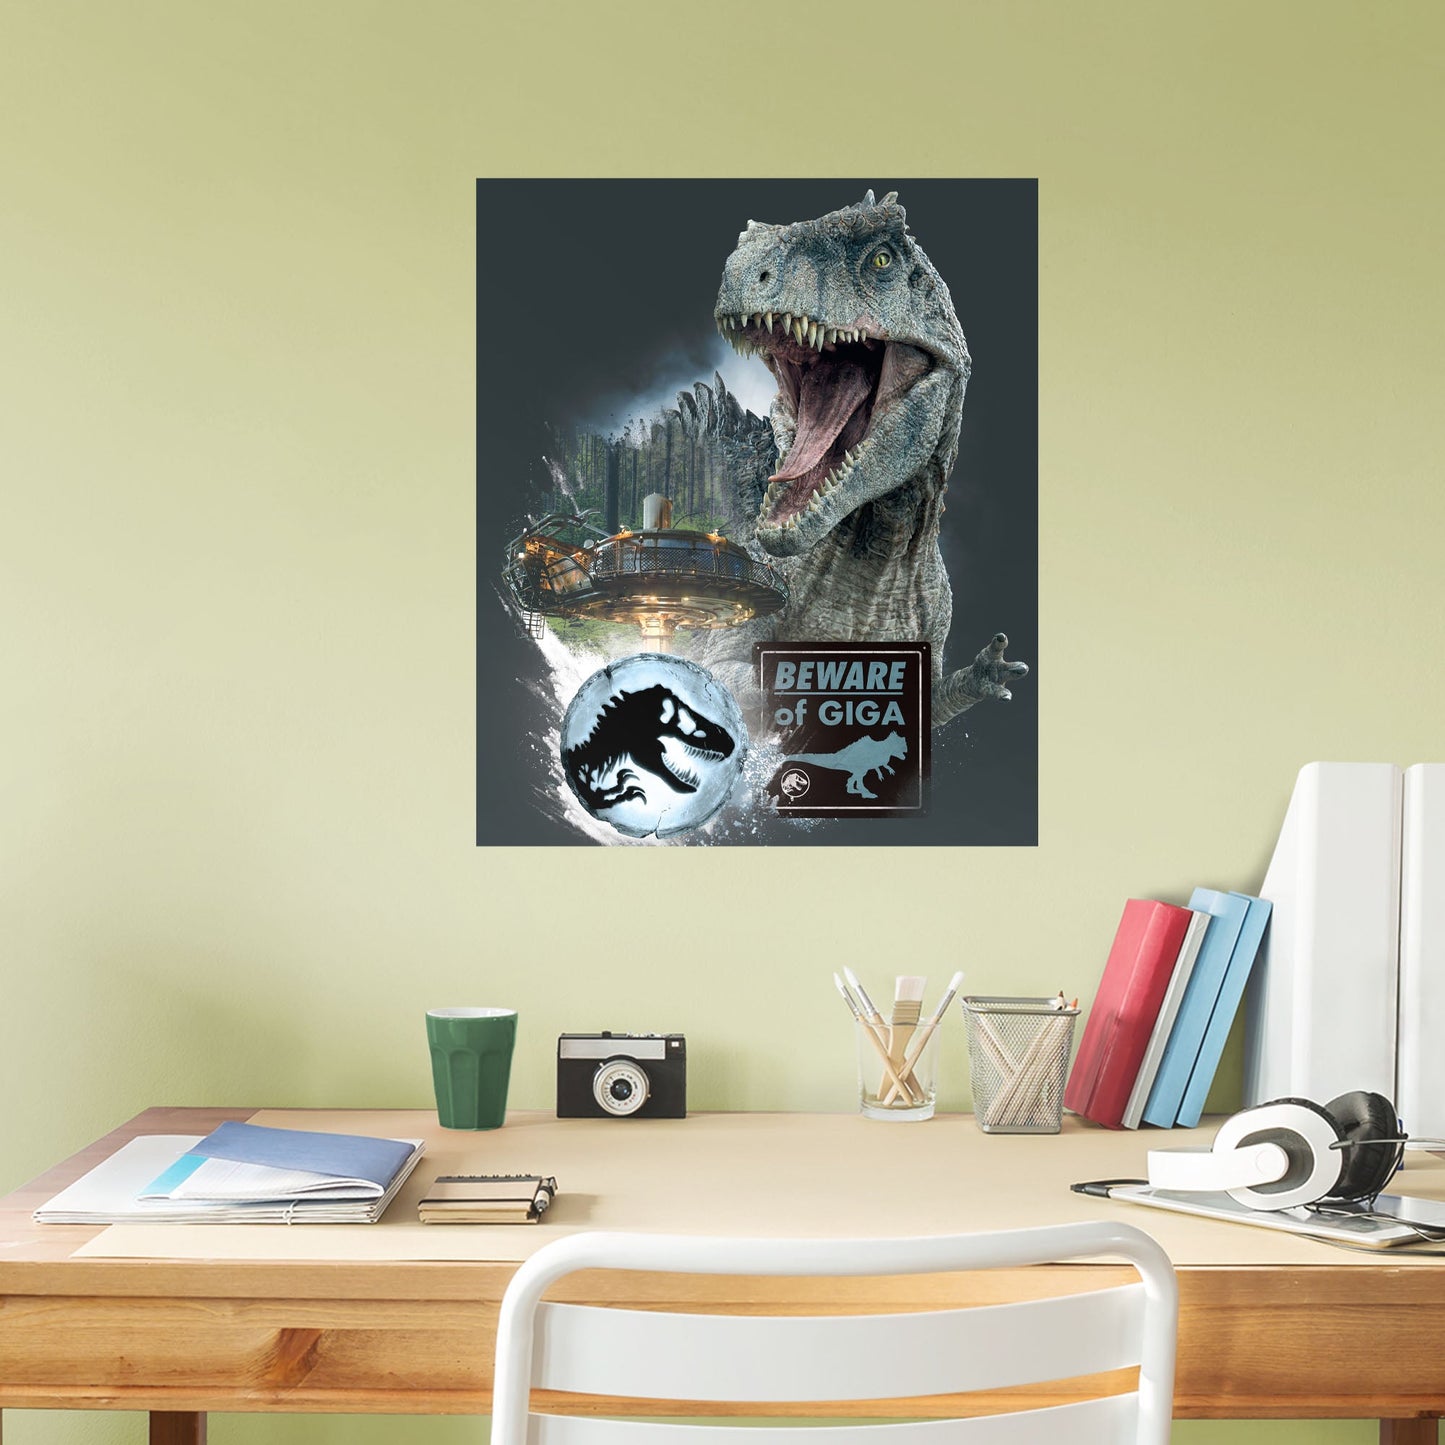 Jurassic World Dominion: Giganotosaurus Collage Poster - Officially Licensed NBC Universal Removable Adhesive Decal